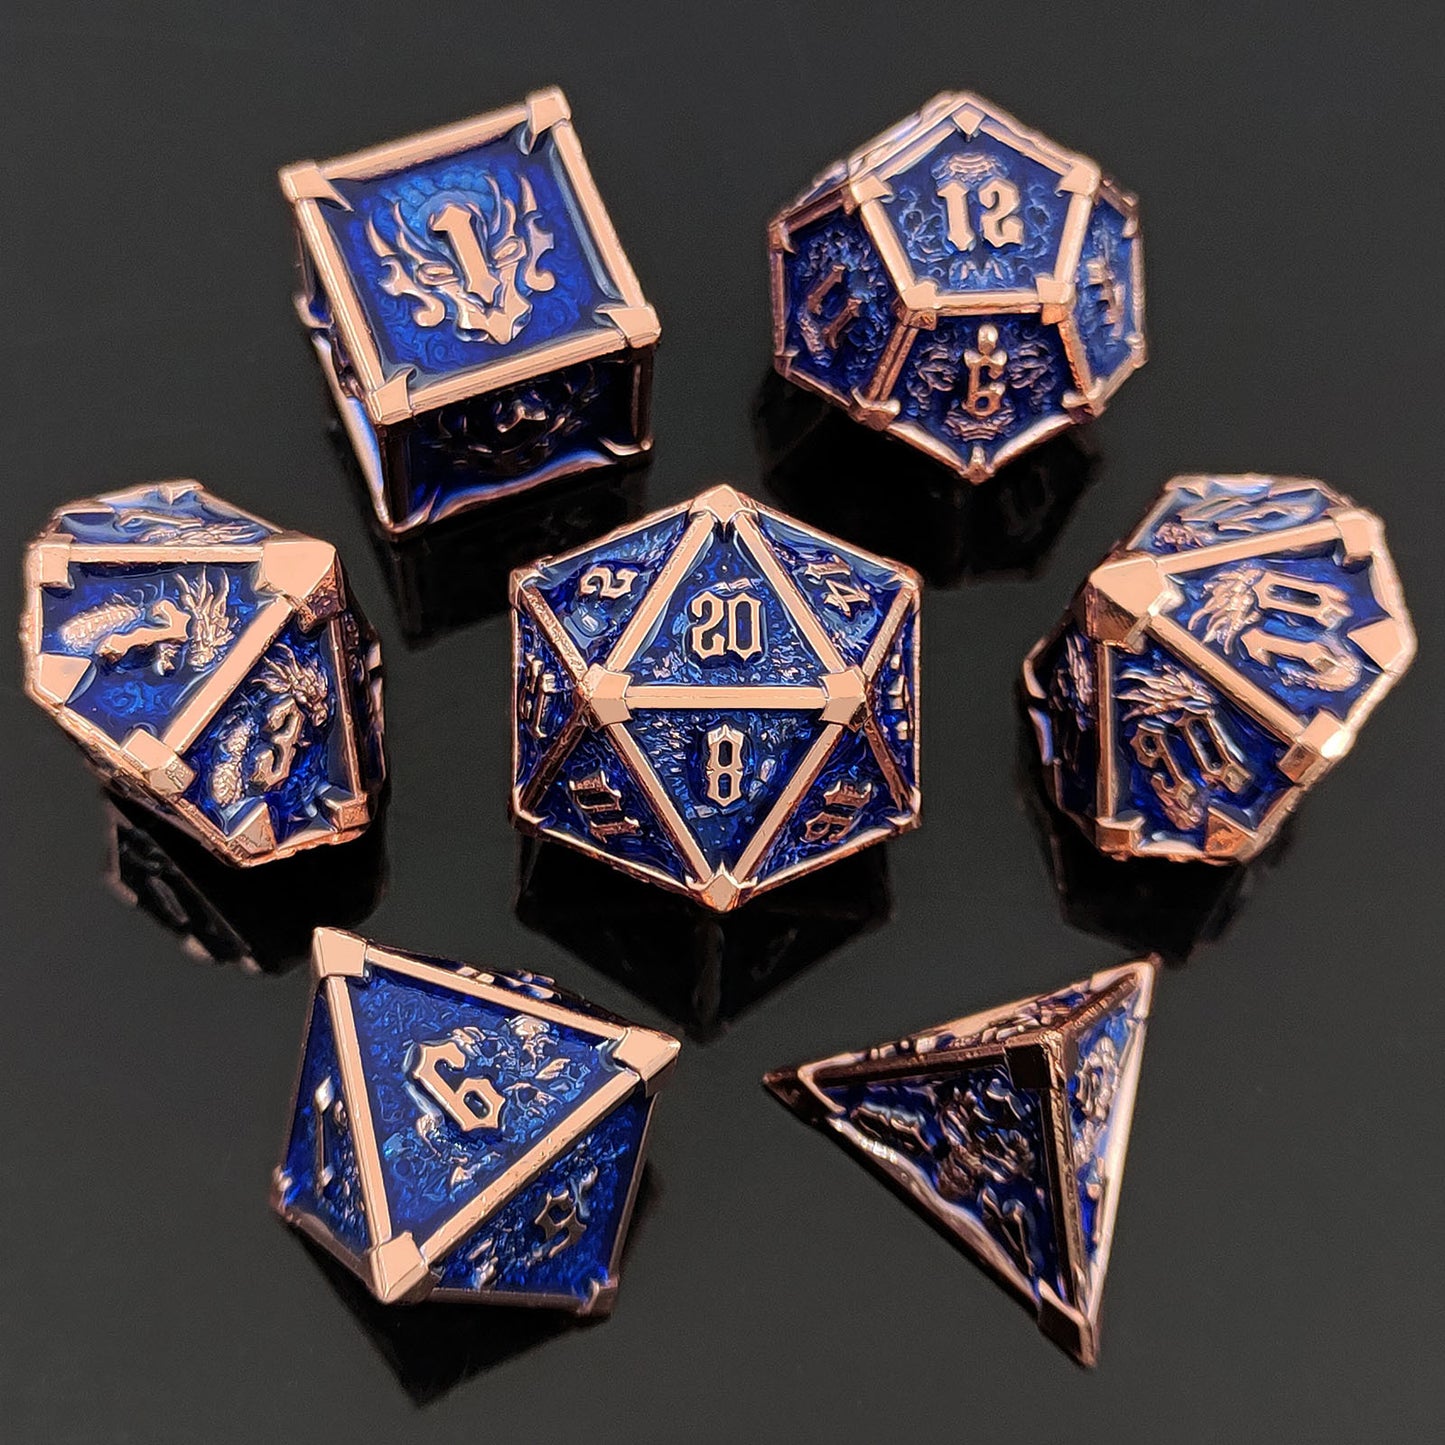 Metal Solid Star angle Dice Set, Copper Royal Blue